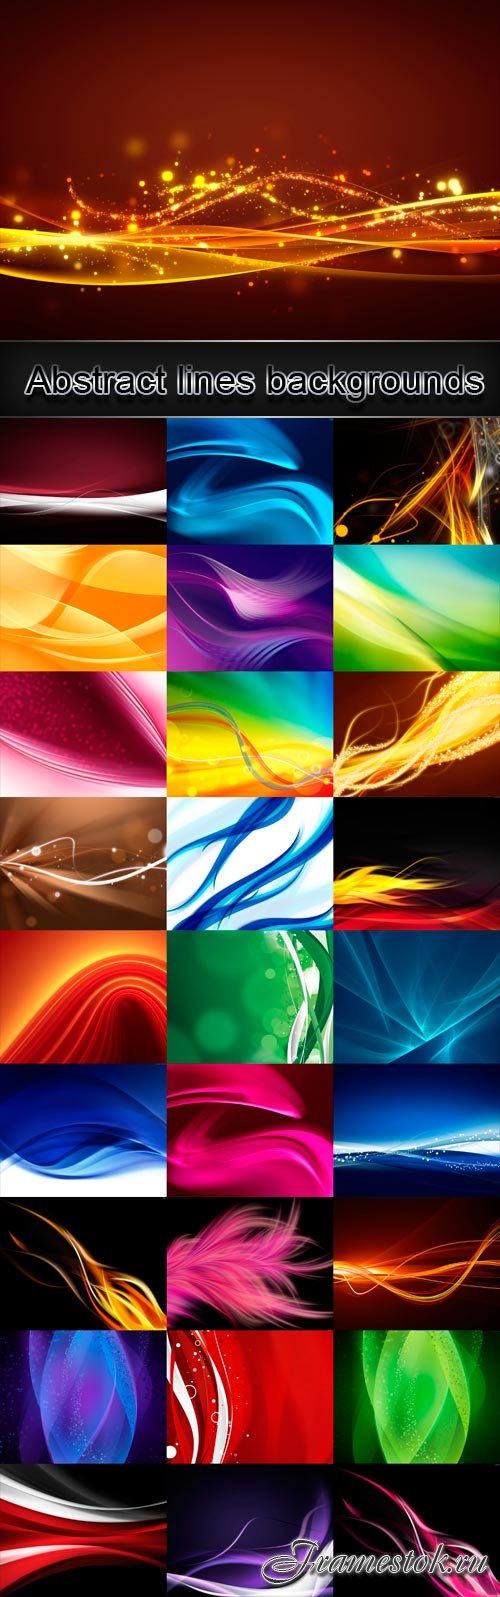 Abstract lines backgrounds